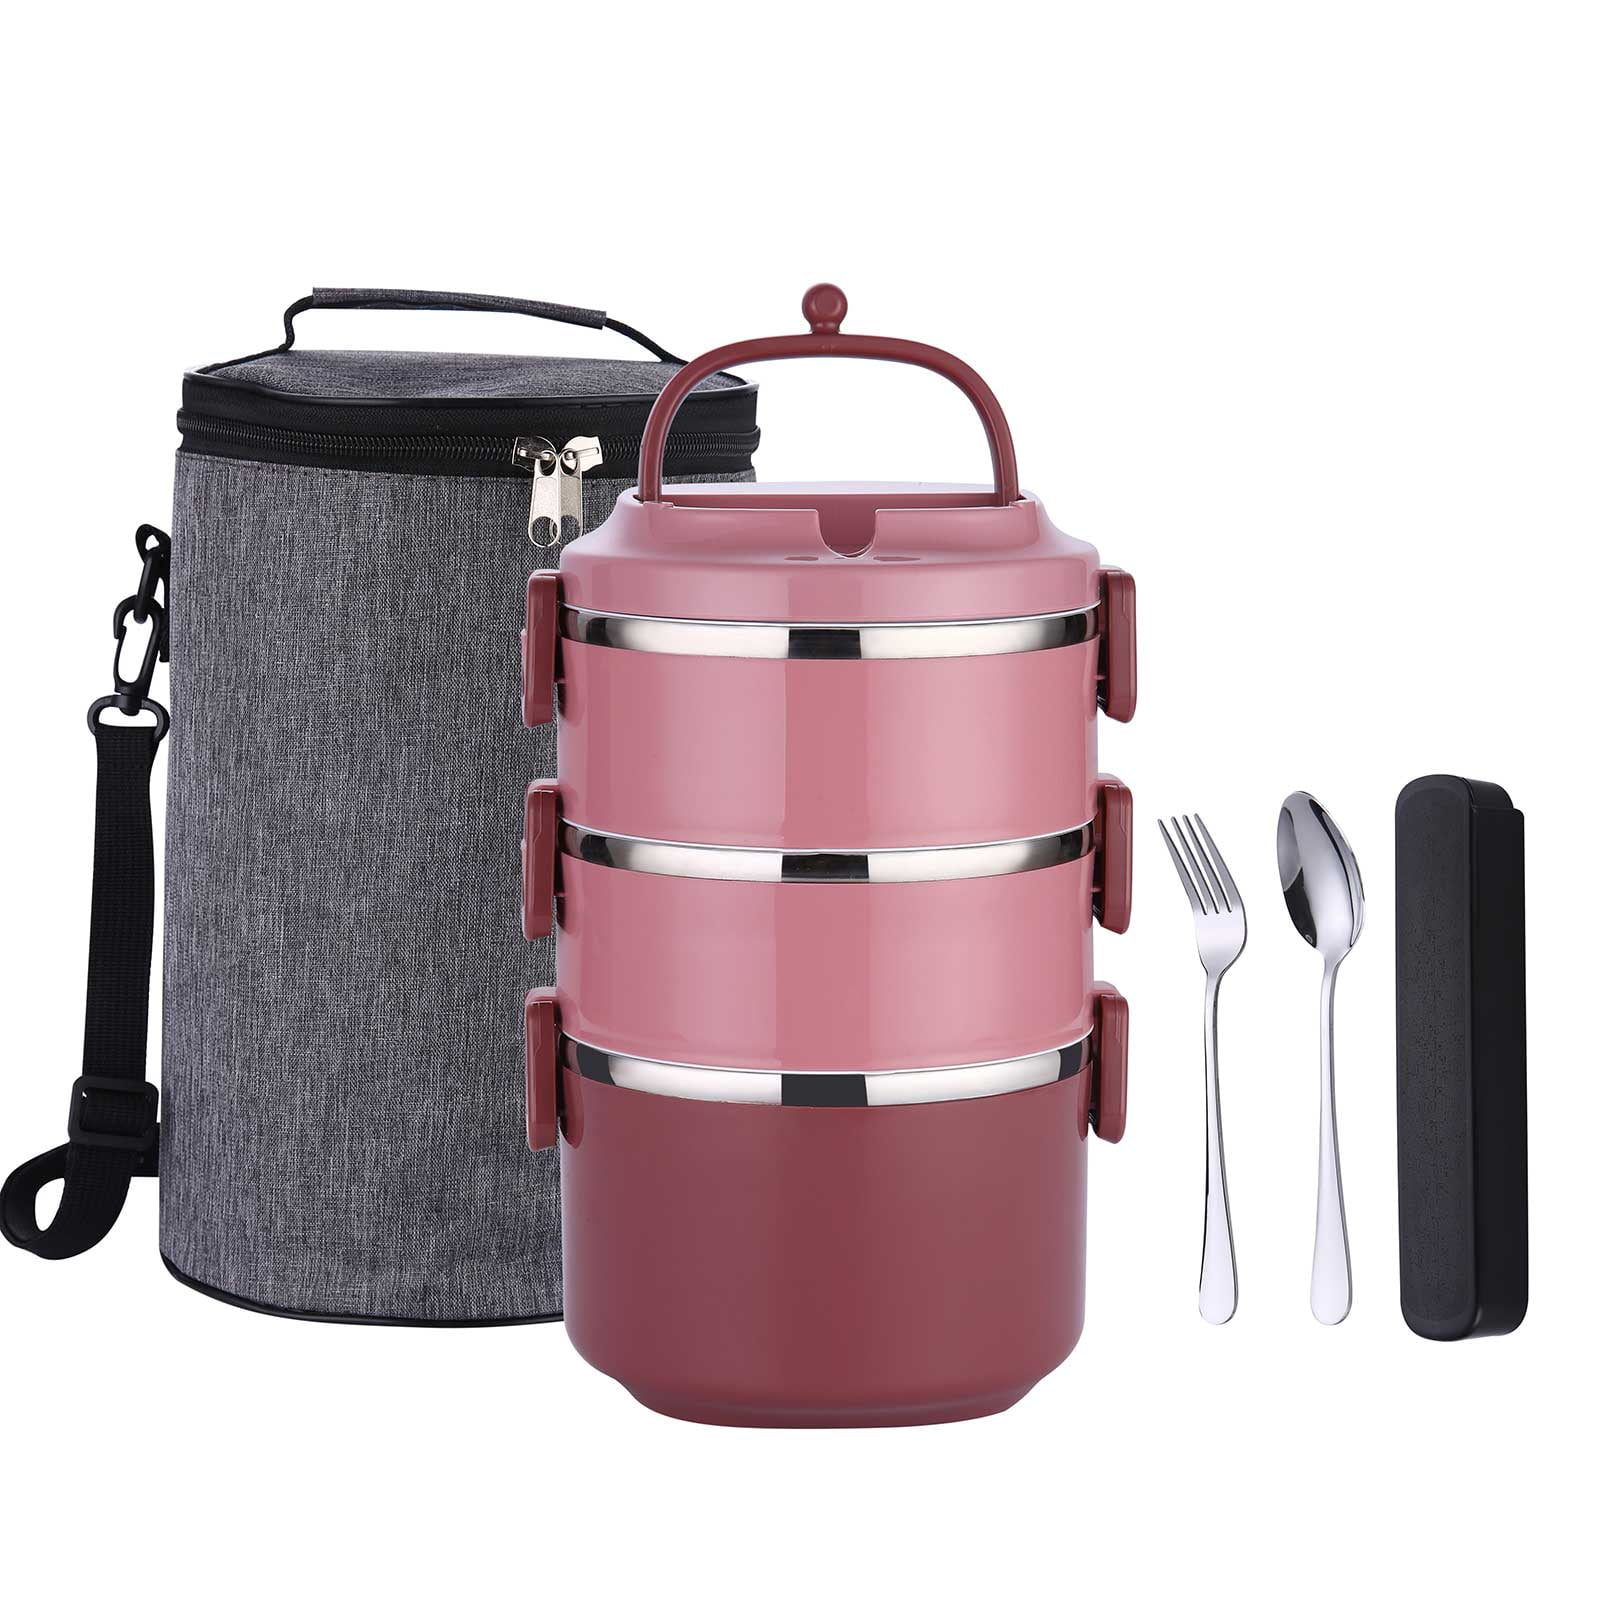 LunchBots Trio Stainless Steel 3 Compartment Bento Box Pink